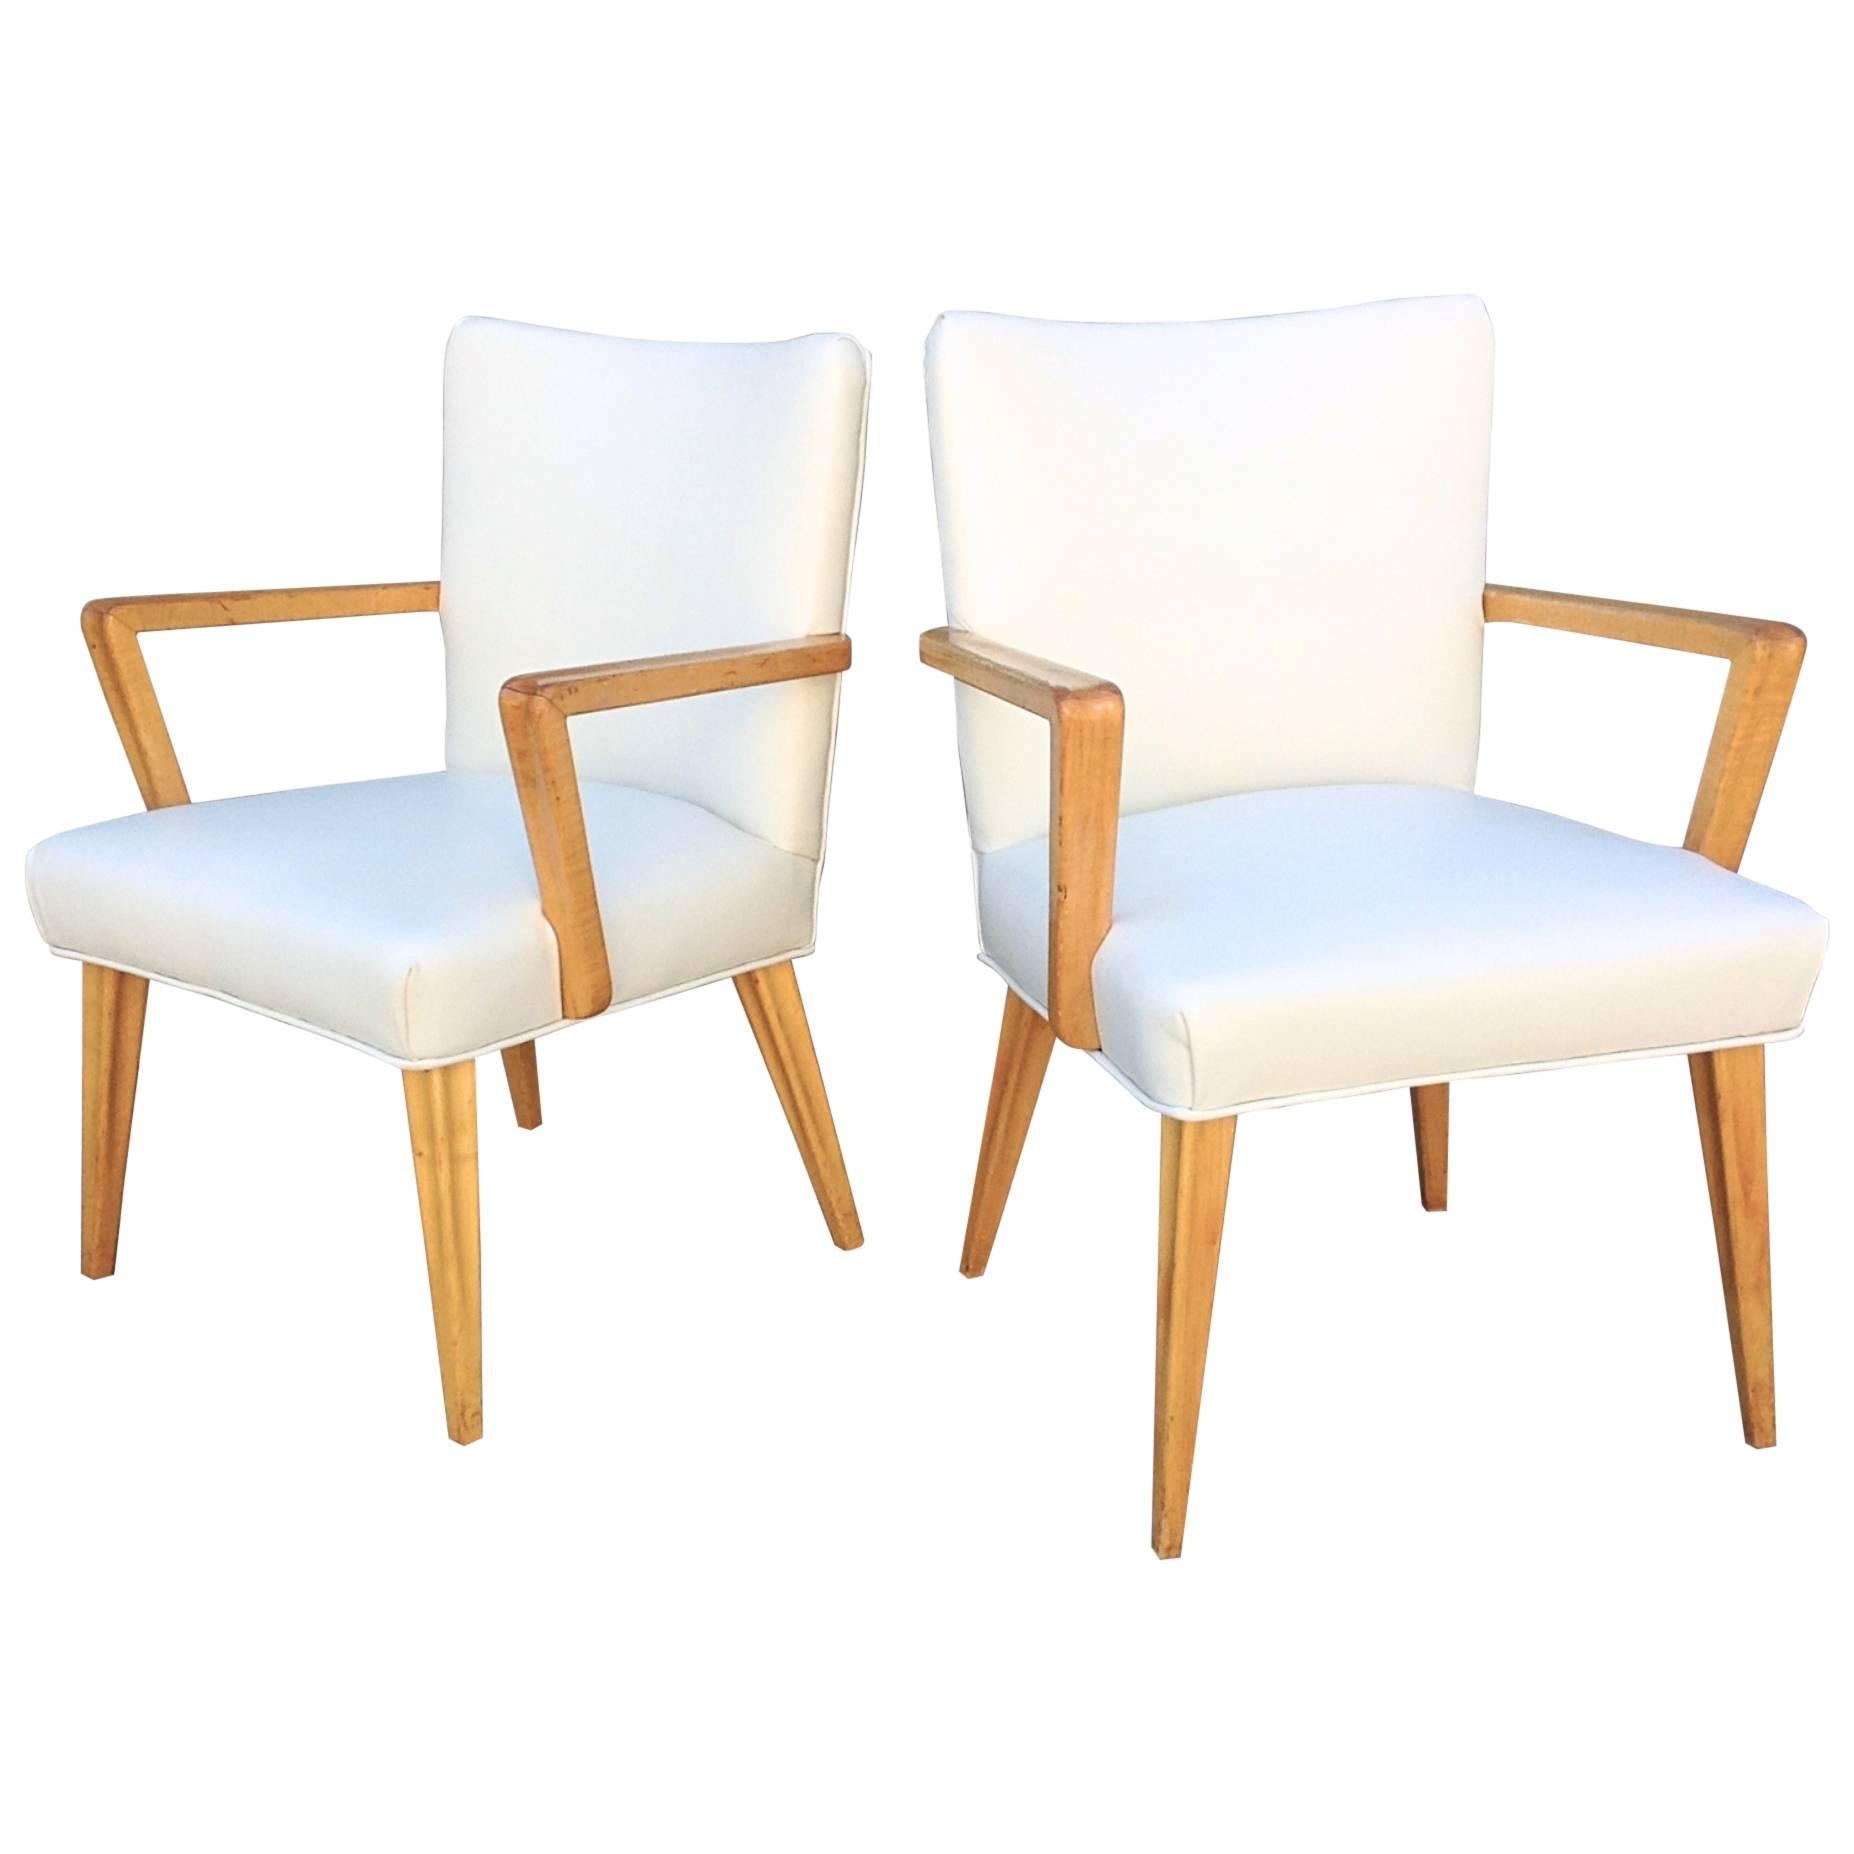 Pair of Leather Open Armchairs Ernst Schwadron, circa 1940s For Sale